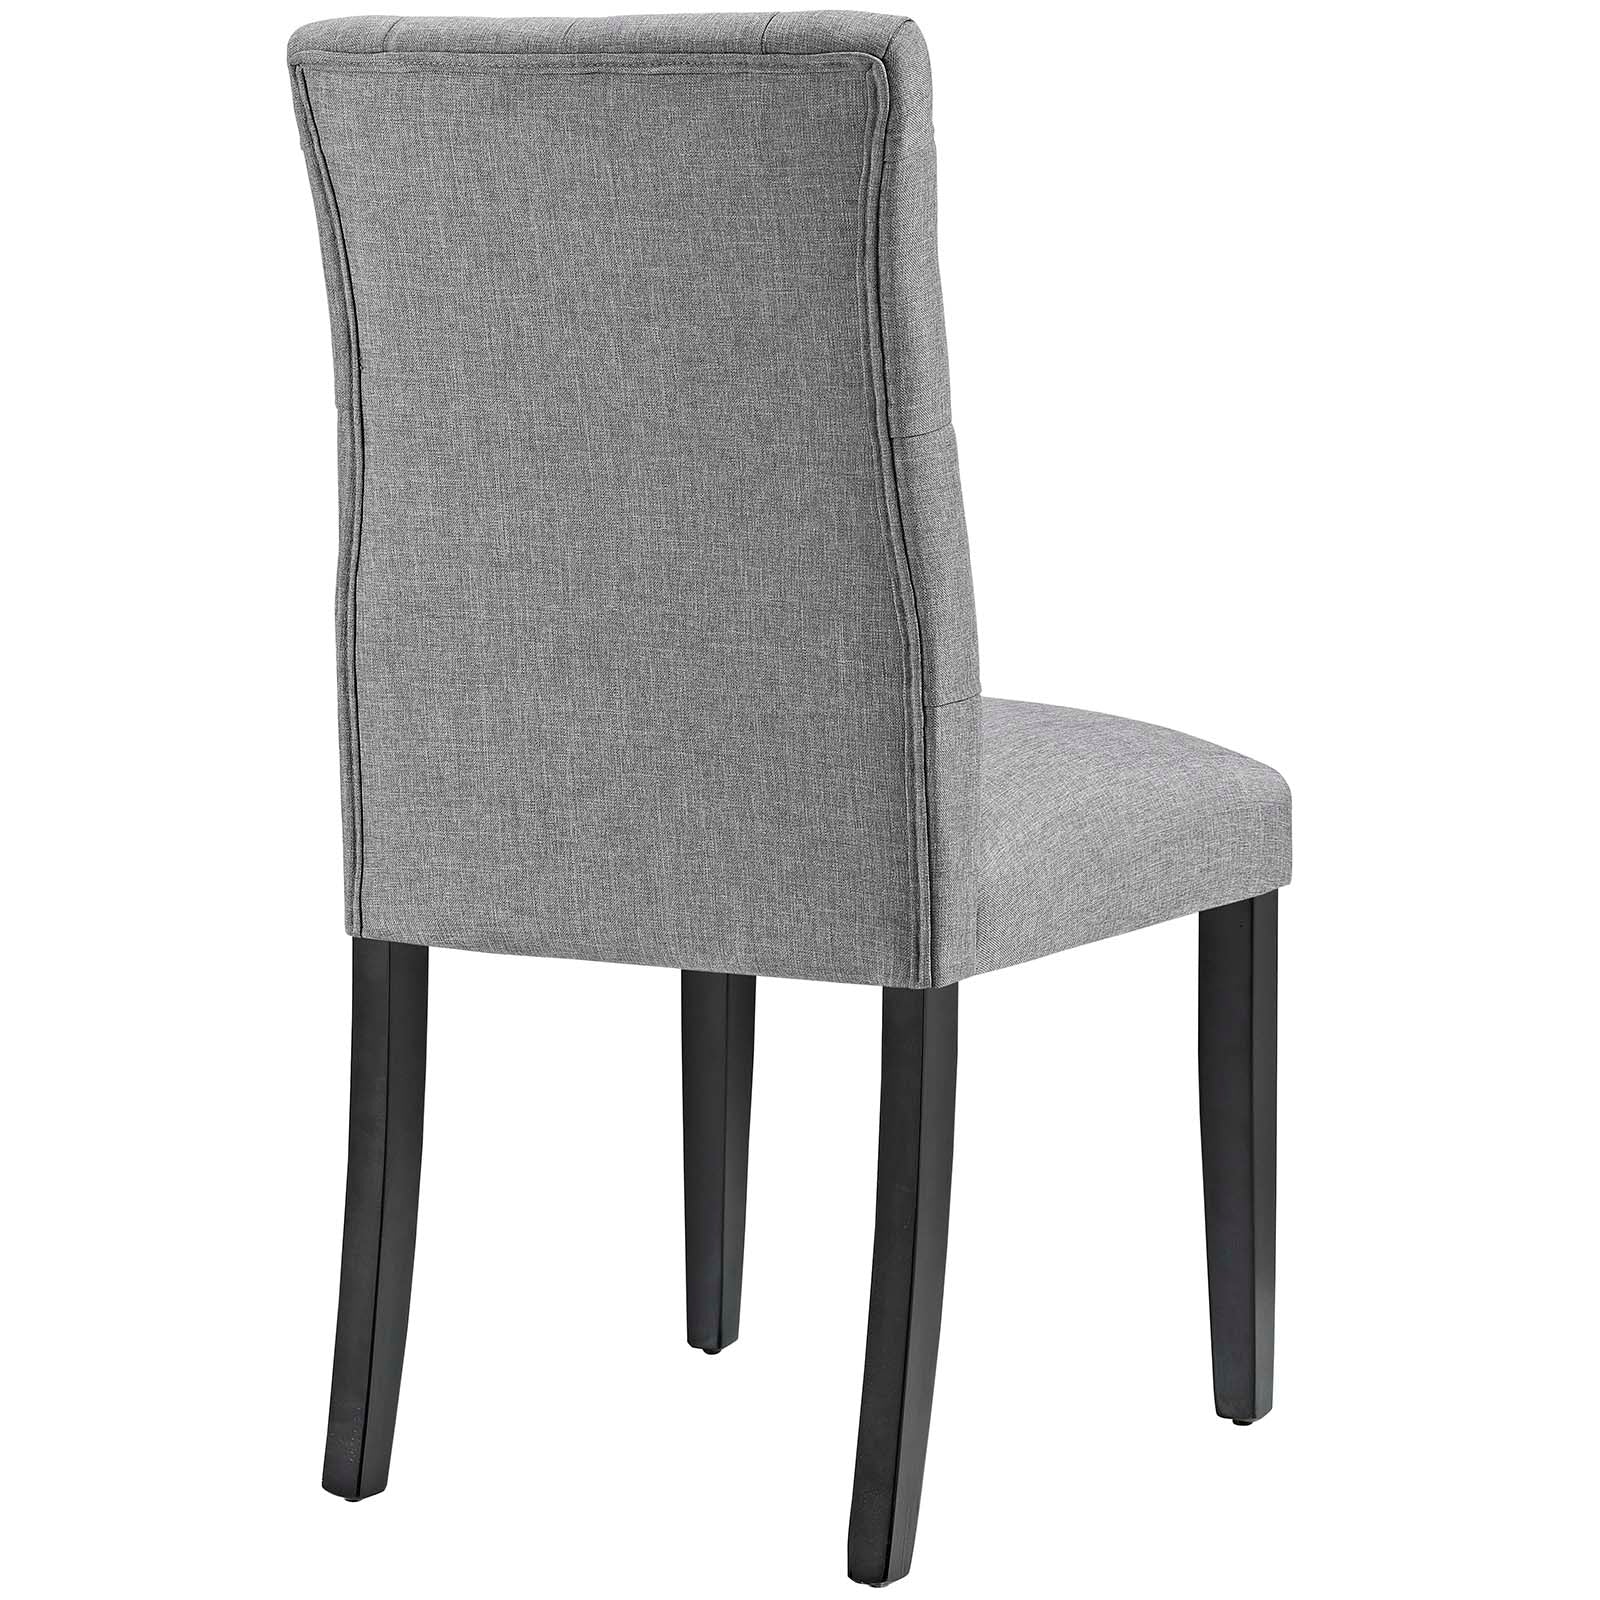 Modway Dining Chairs - Duchess Dining Chair Fabric Light Gray (Set of 4)